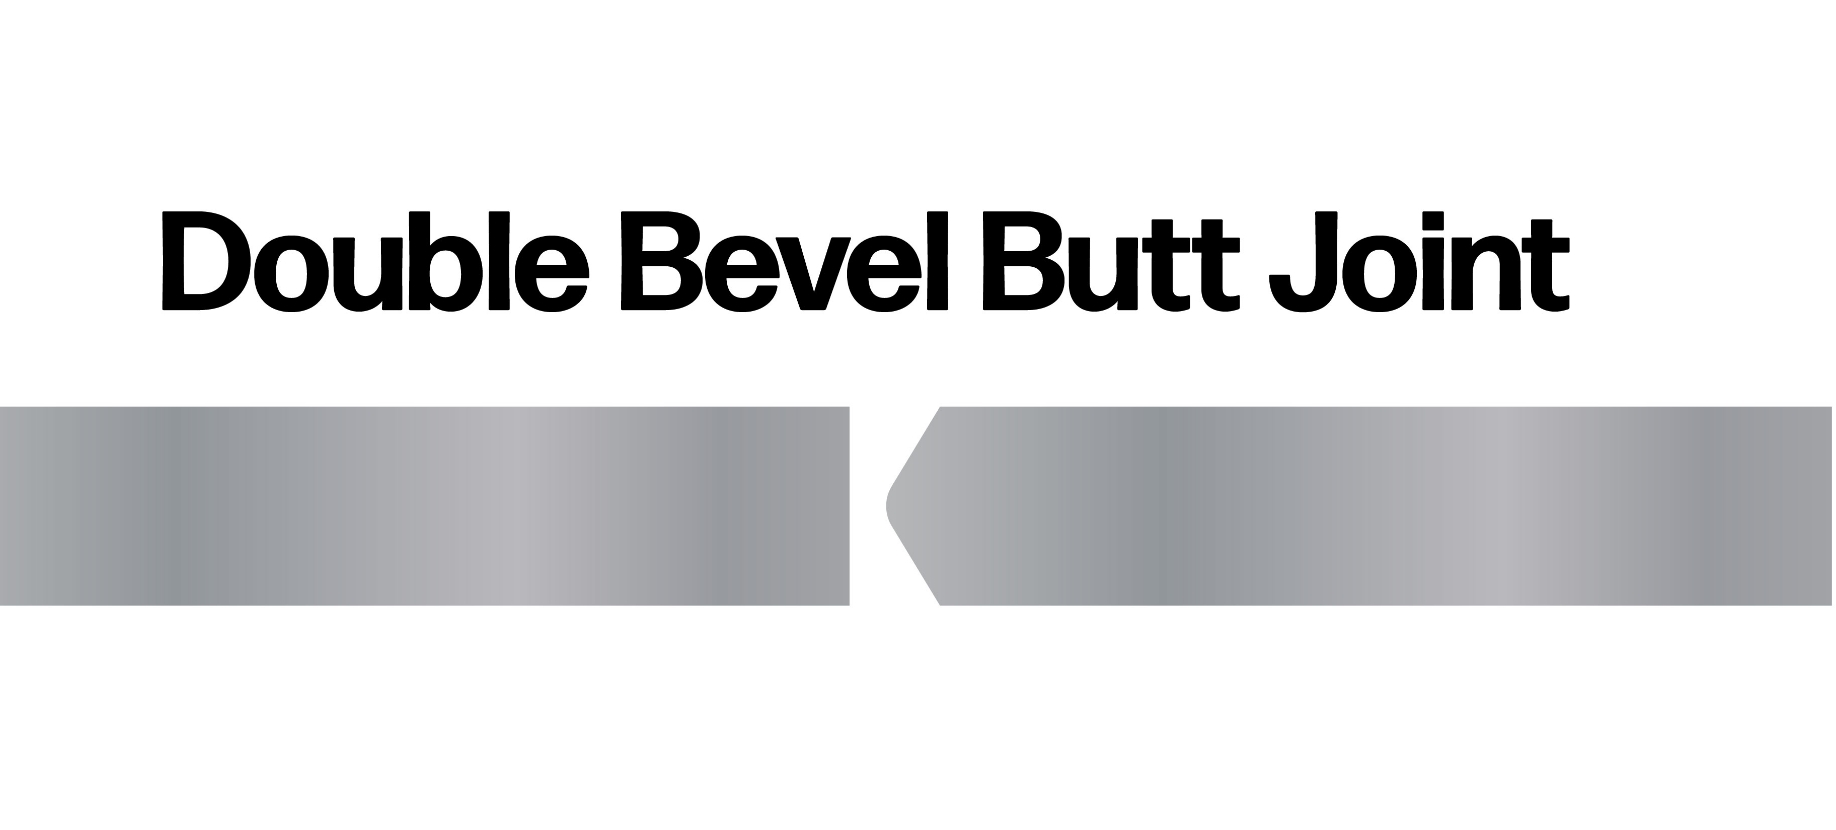 Double Bevel Butt Joint Graphic